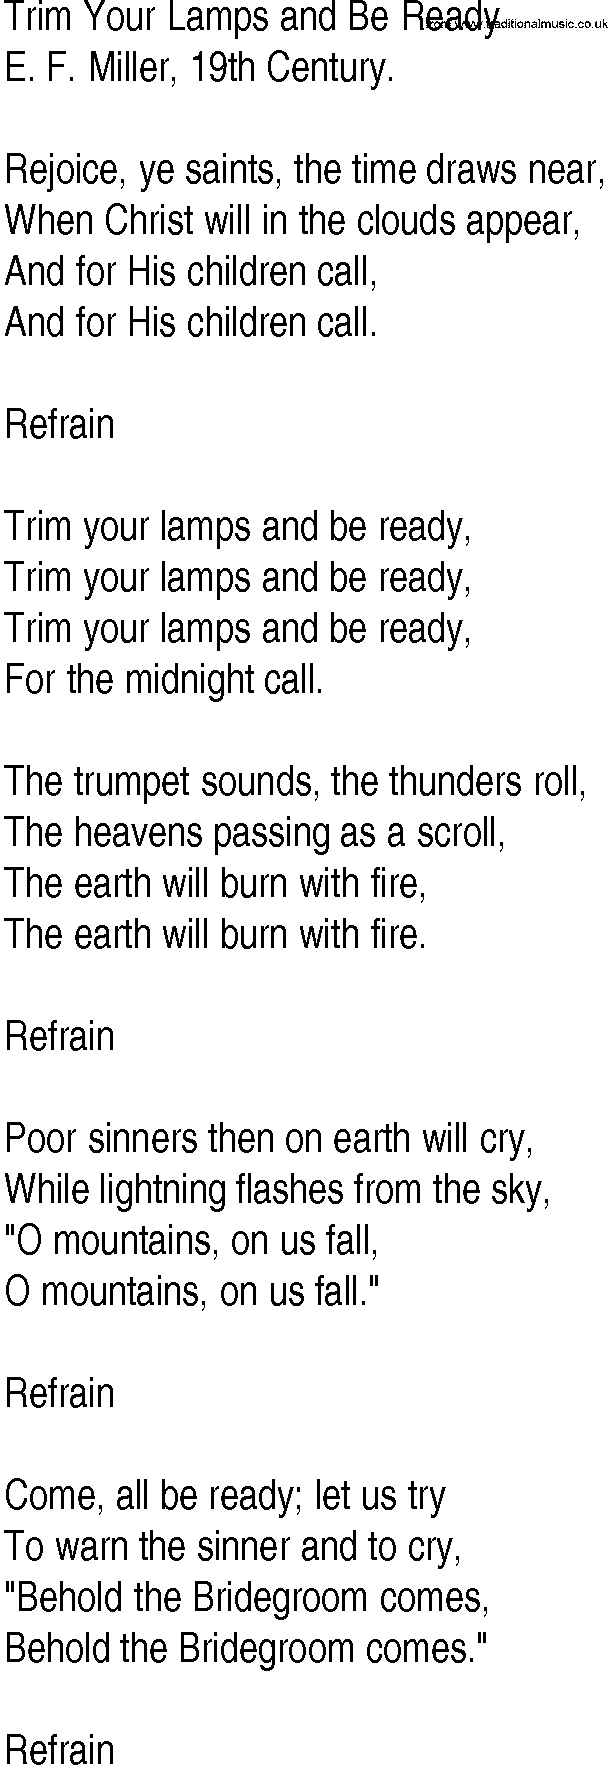 Hymn and Gospel Song: Trim Your Lamps and Be Ready by E F Miller th Century lyrics